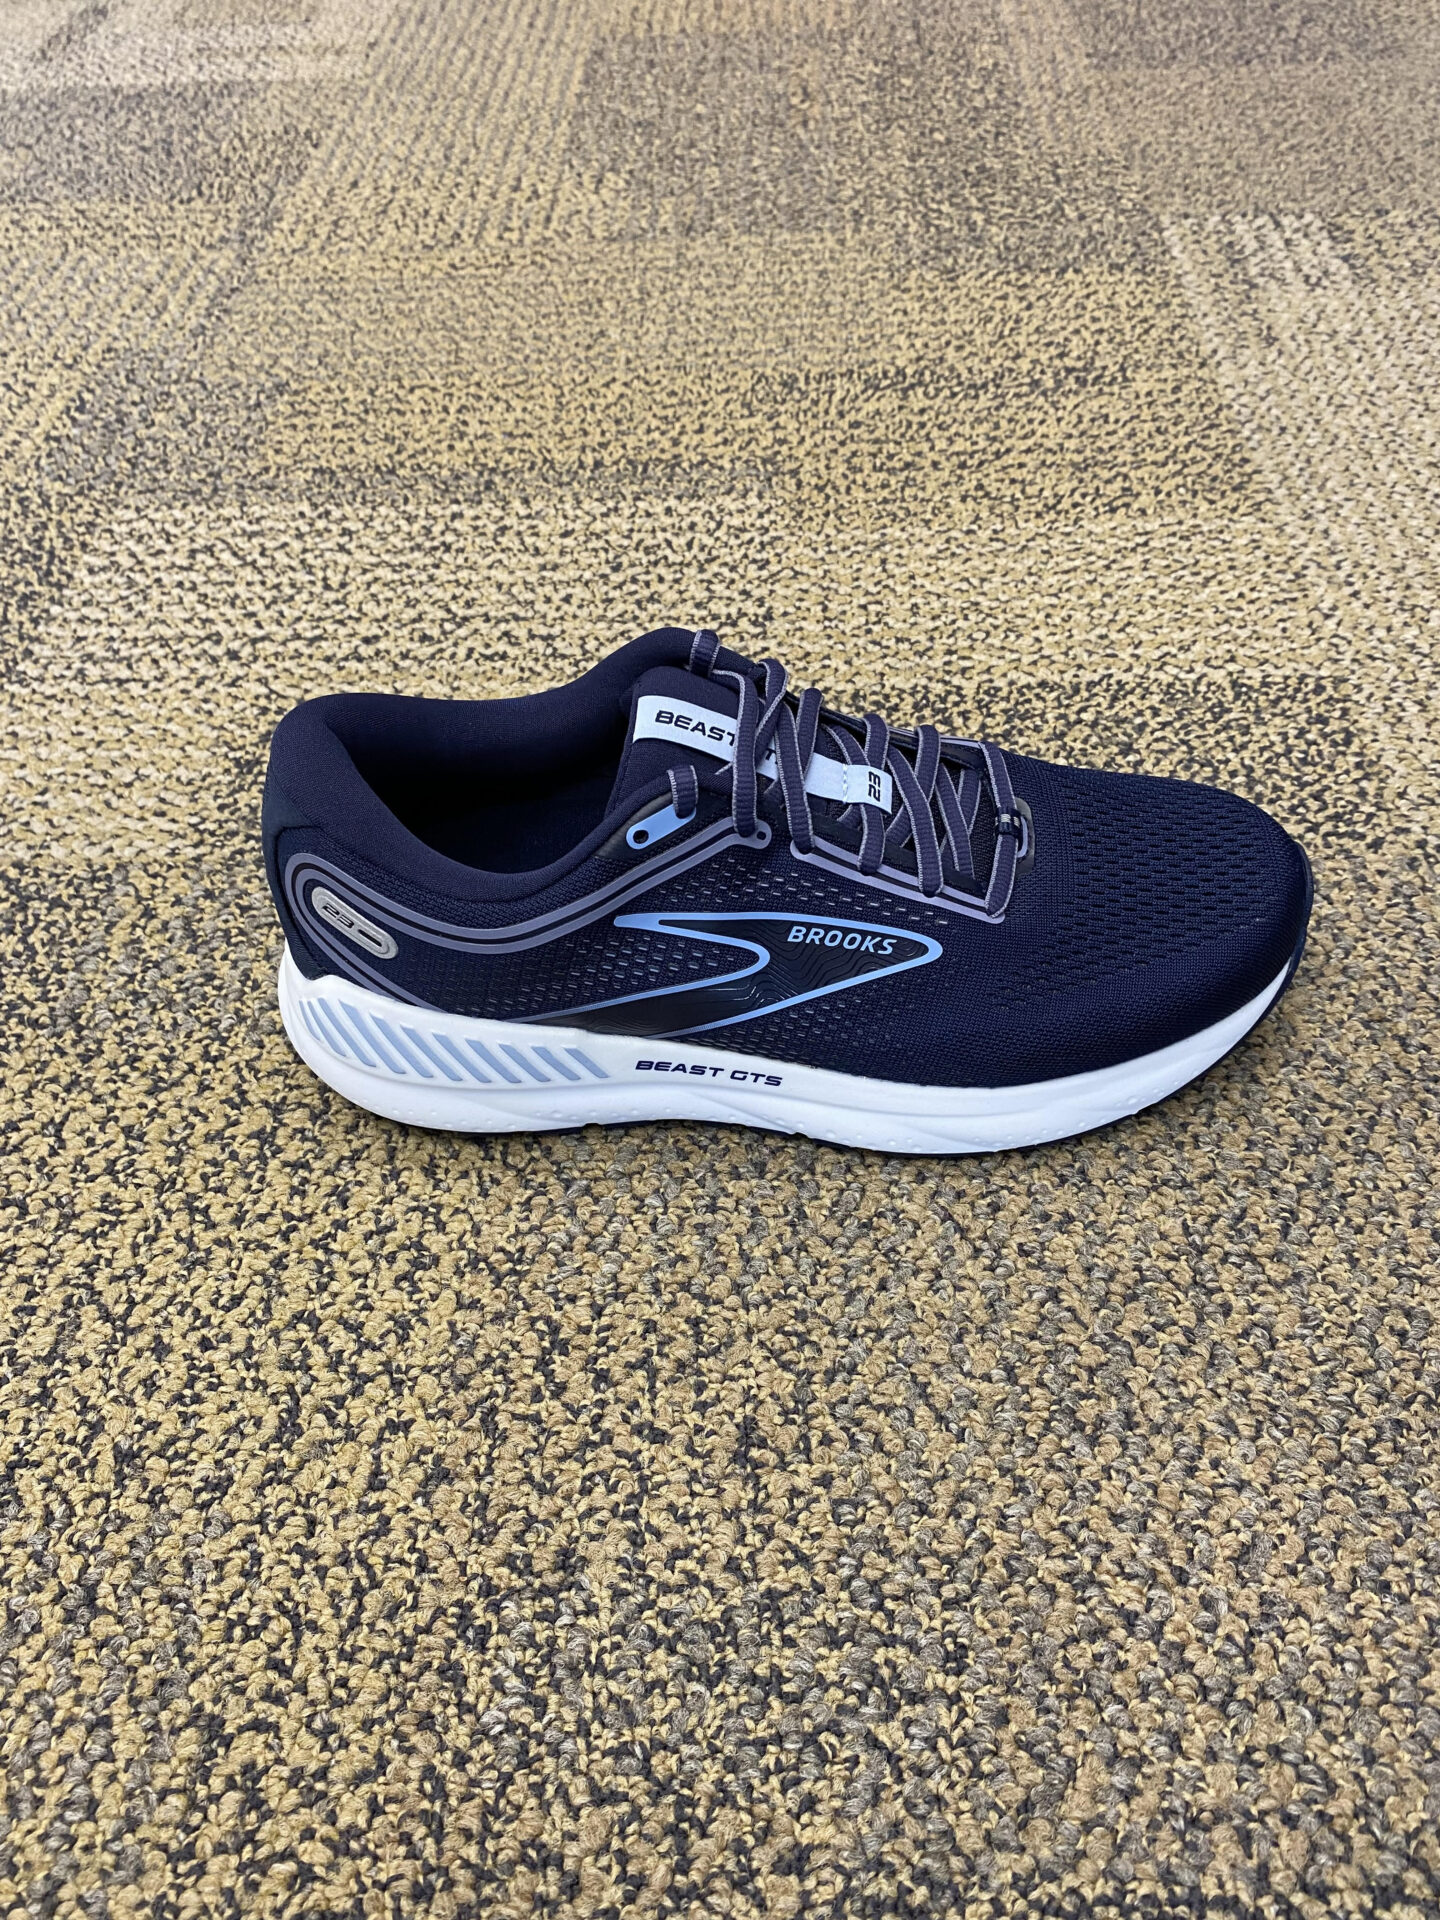 Men's Footwear - Niagara Foot Care Clinic and Orthotic Centre